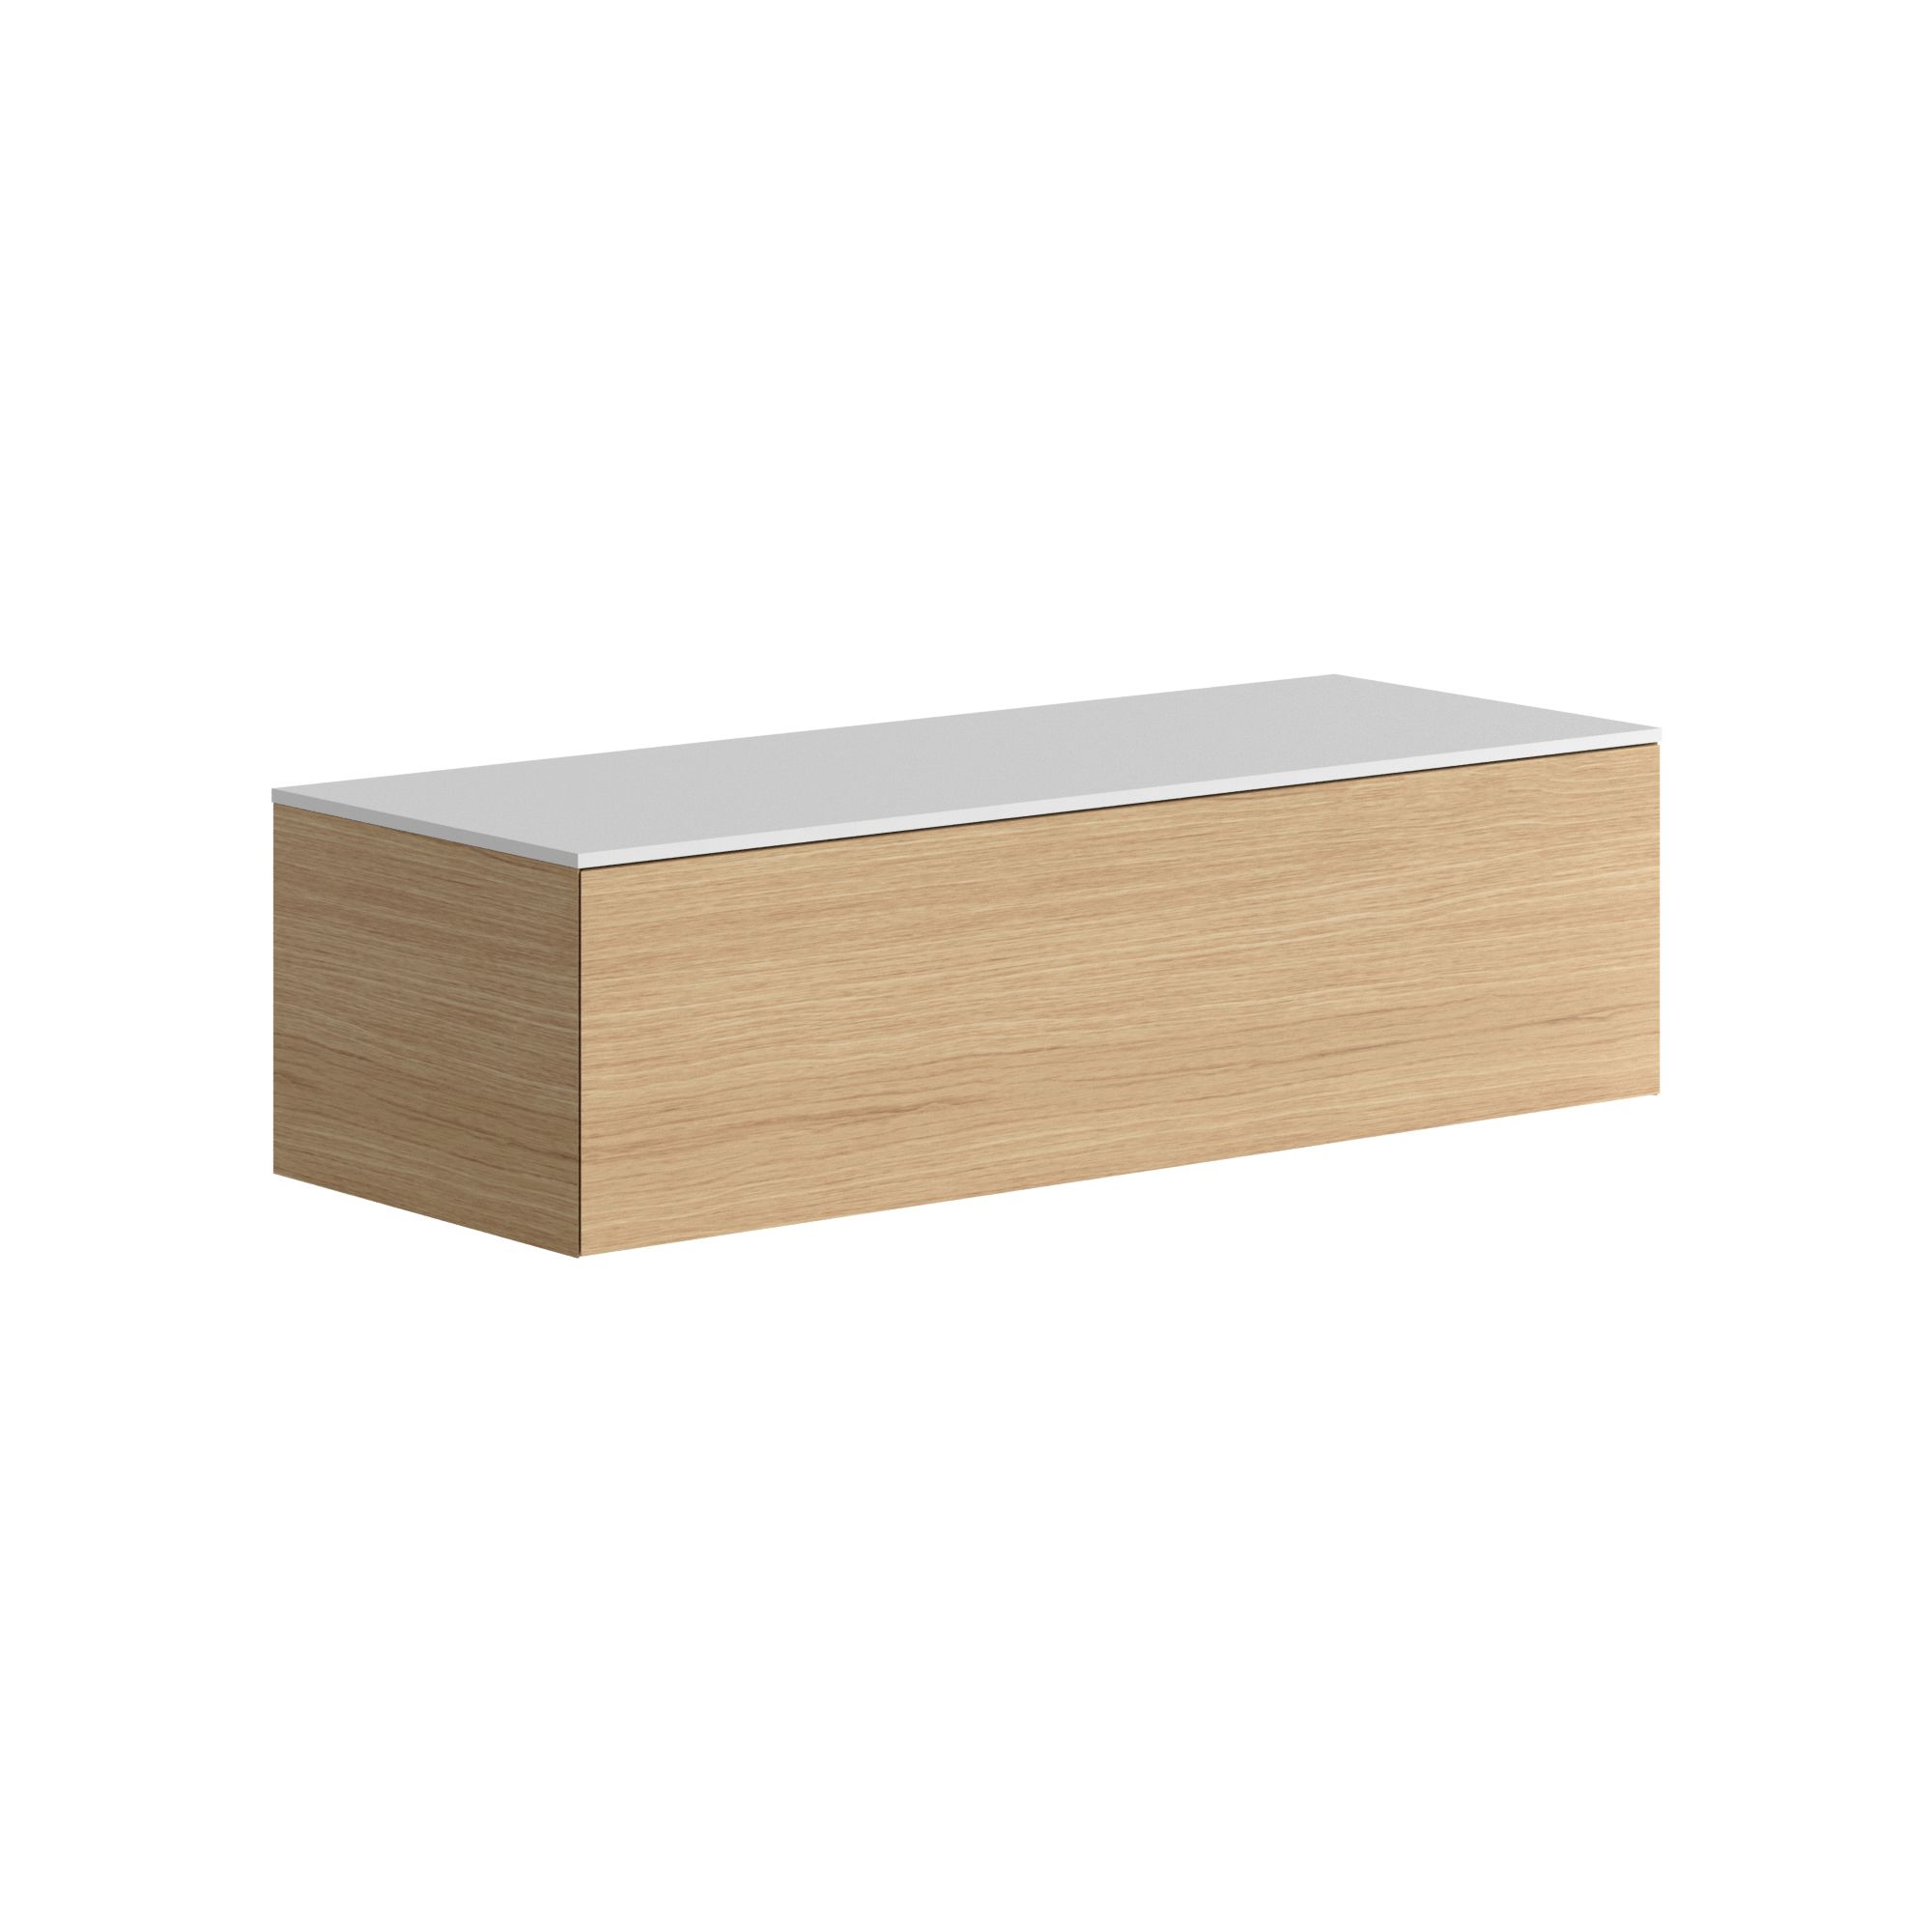 The Ellery Auxiliary Push Open Unit 1200x320mm with Solid Surface Countertop